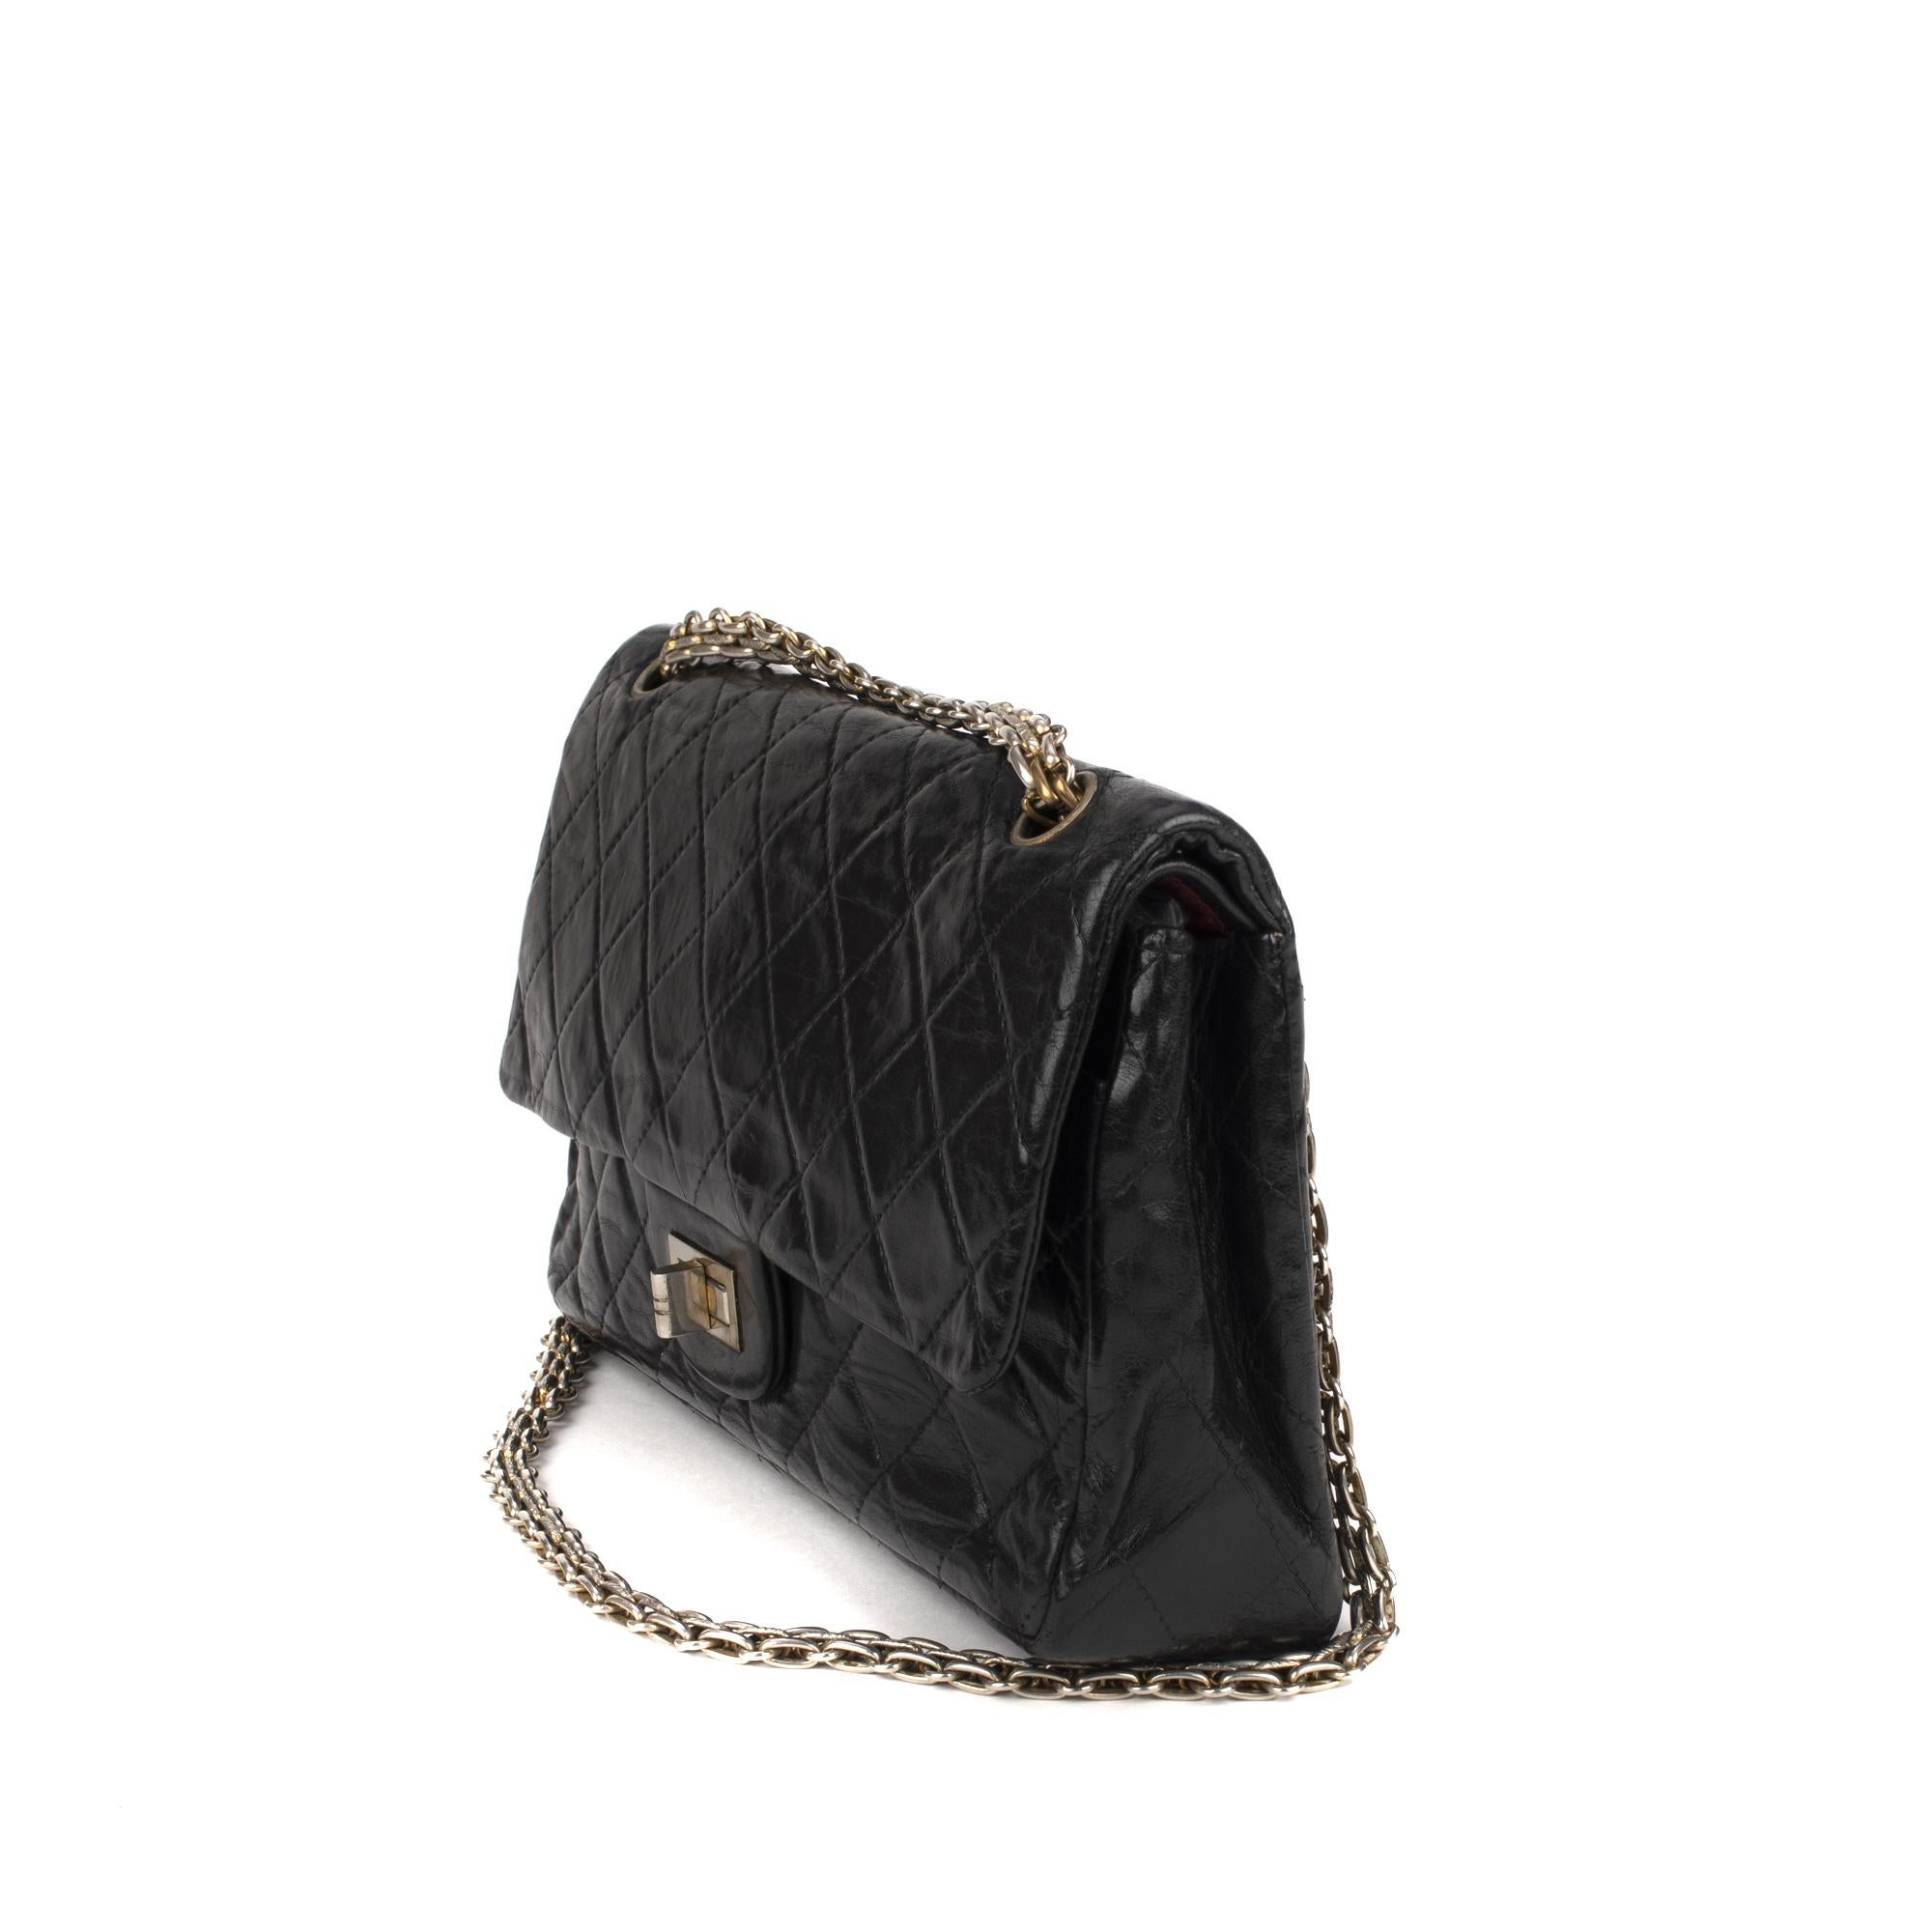 CHANEL Circa 1960.

2.55 bag in black lambskin leather.

Flat chain handle for

shoulder.

Dimensions: 25 x 15 x 6 cm.

Very nice vintage condition with some signs of use on leather and metal parts.